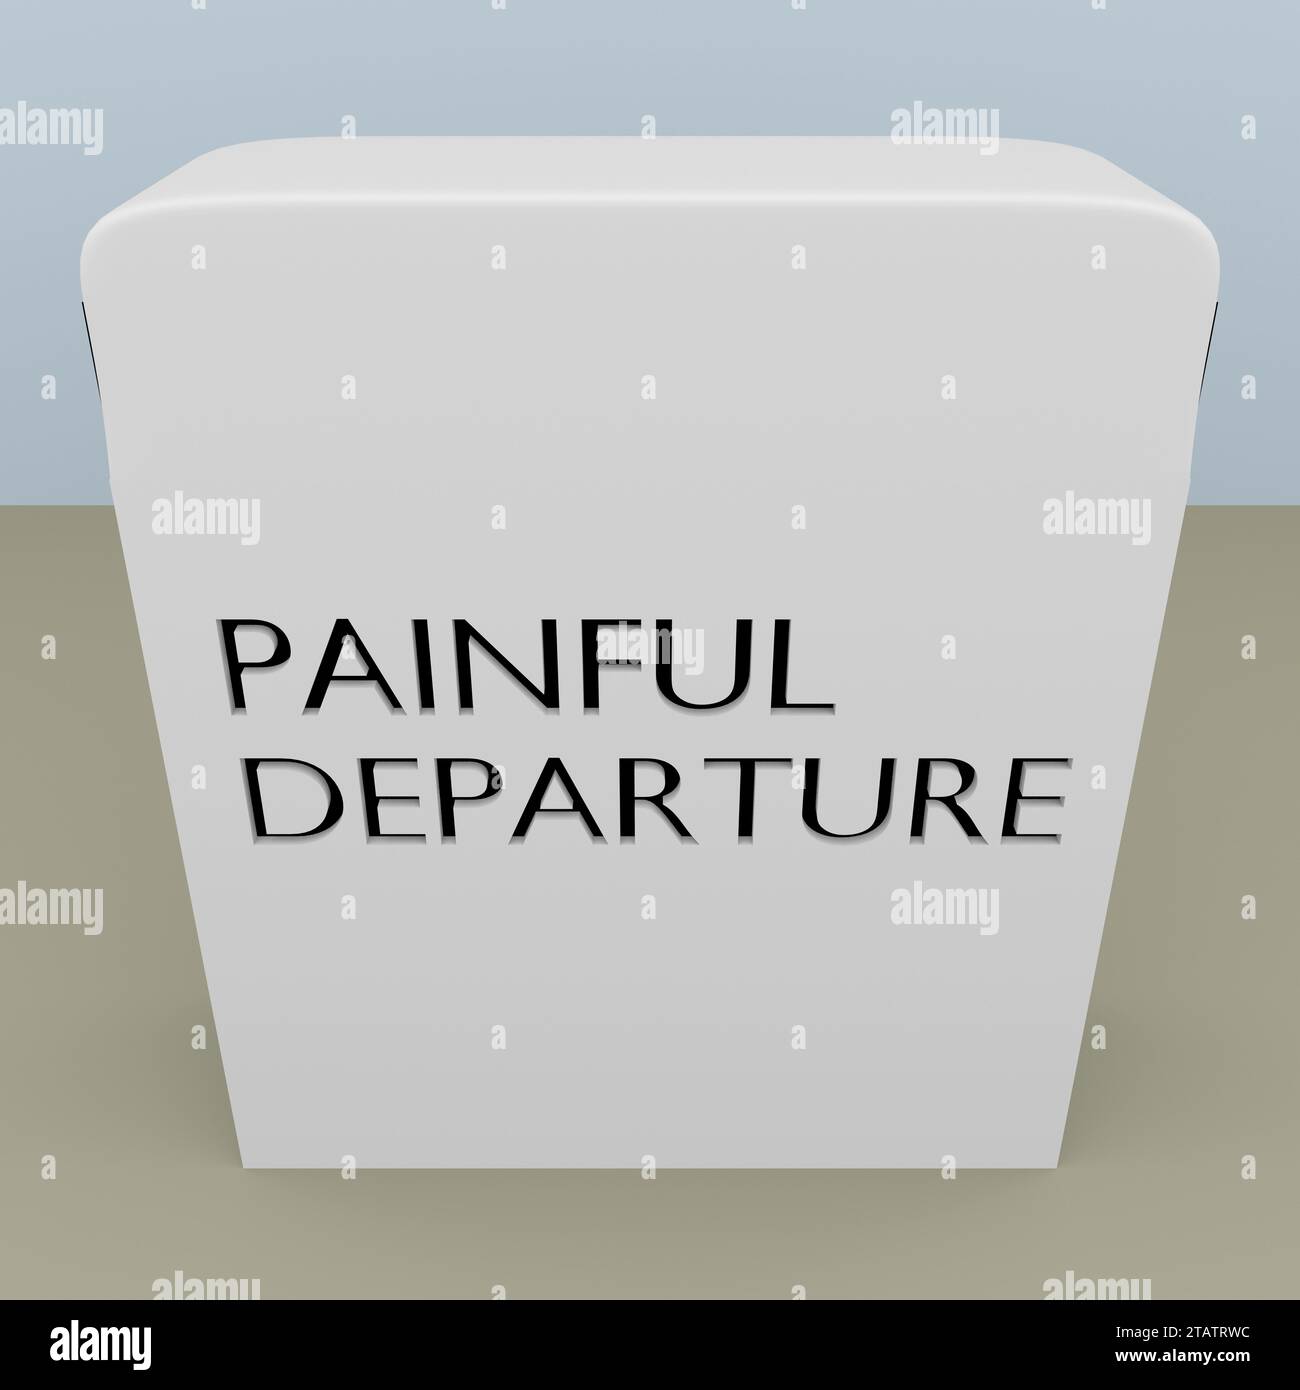 3d illustration of the script PAINFUL DEPARTURE on a symbolic gravestone. Stock Photo